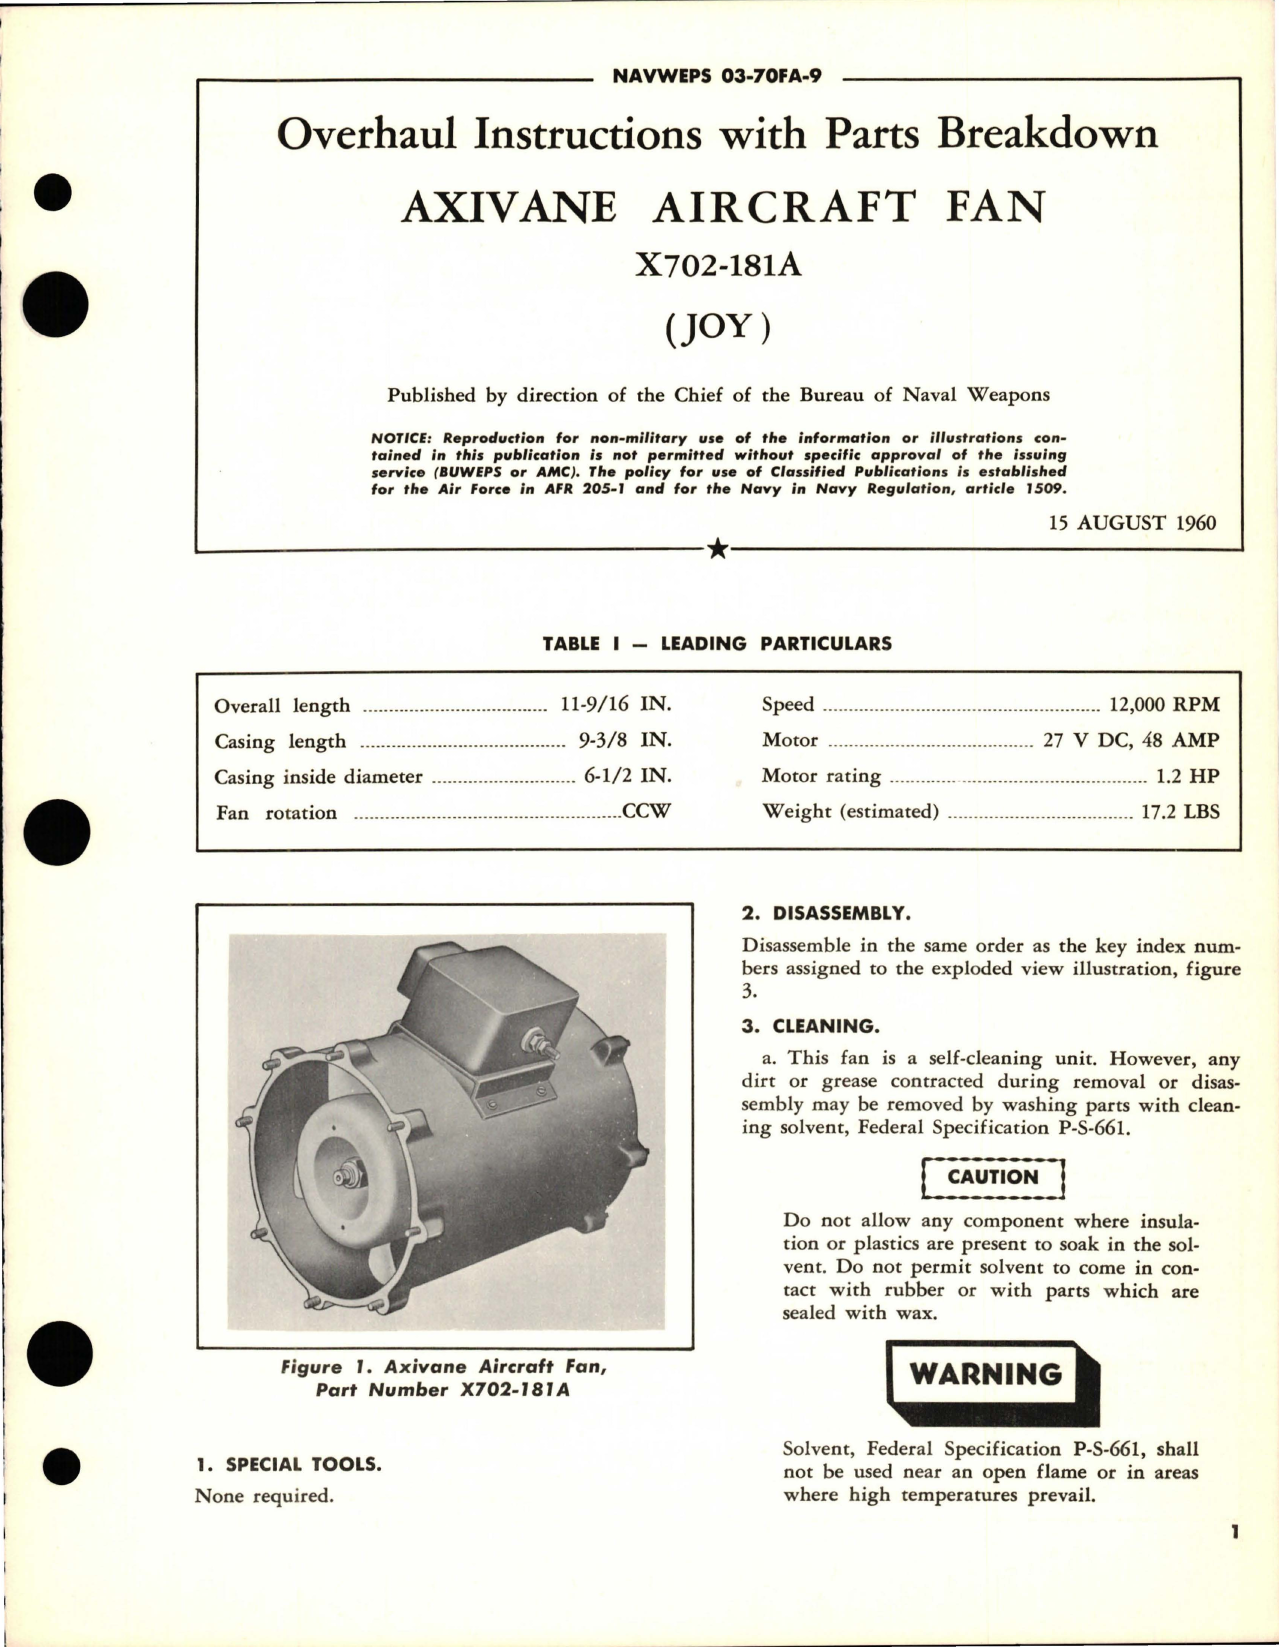 Sample page 1 from AirCorps Library document: Overhaul Instructions with Parts Breakdown for Axivane Aircraft Fan - X702-181A 